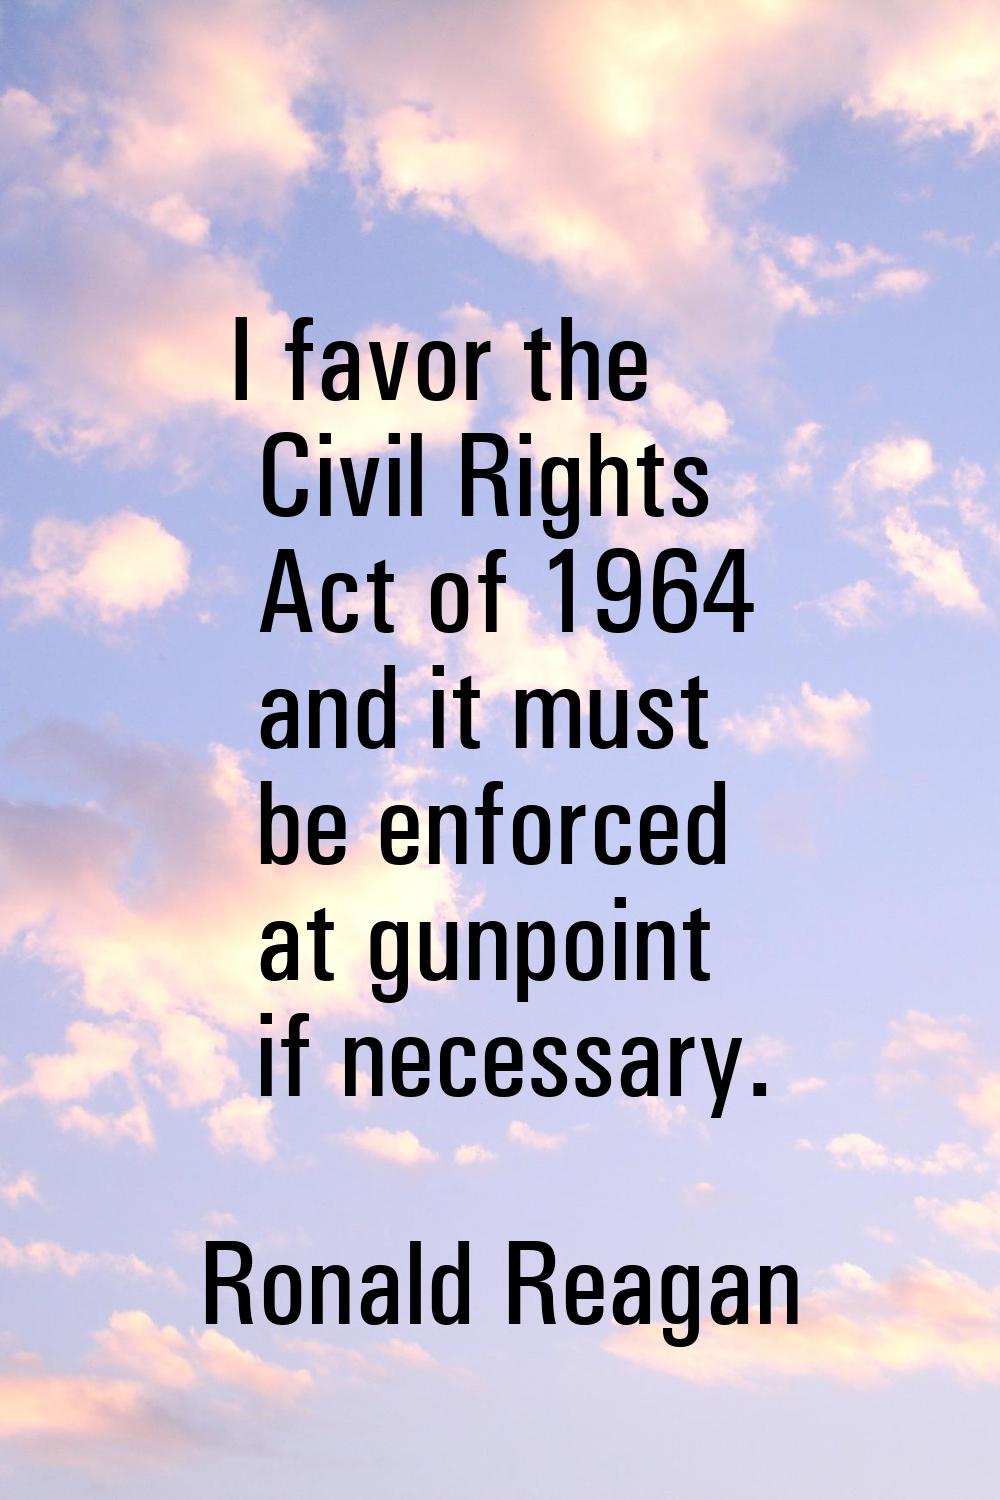 I favor the Civil Rights Act of 1964 and it must be enforced at gunpoint if necessary.